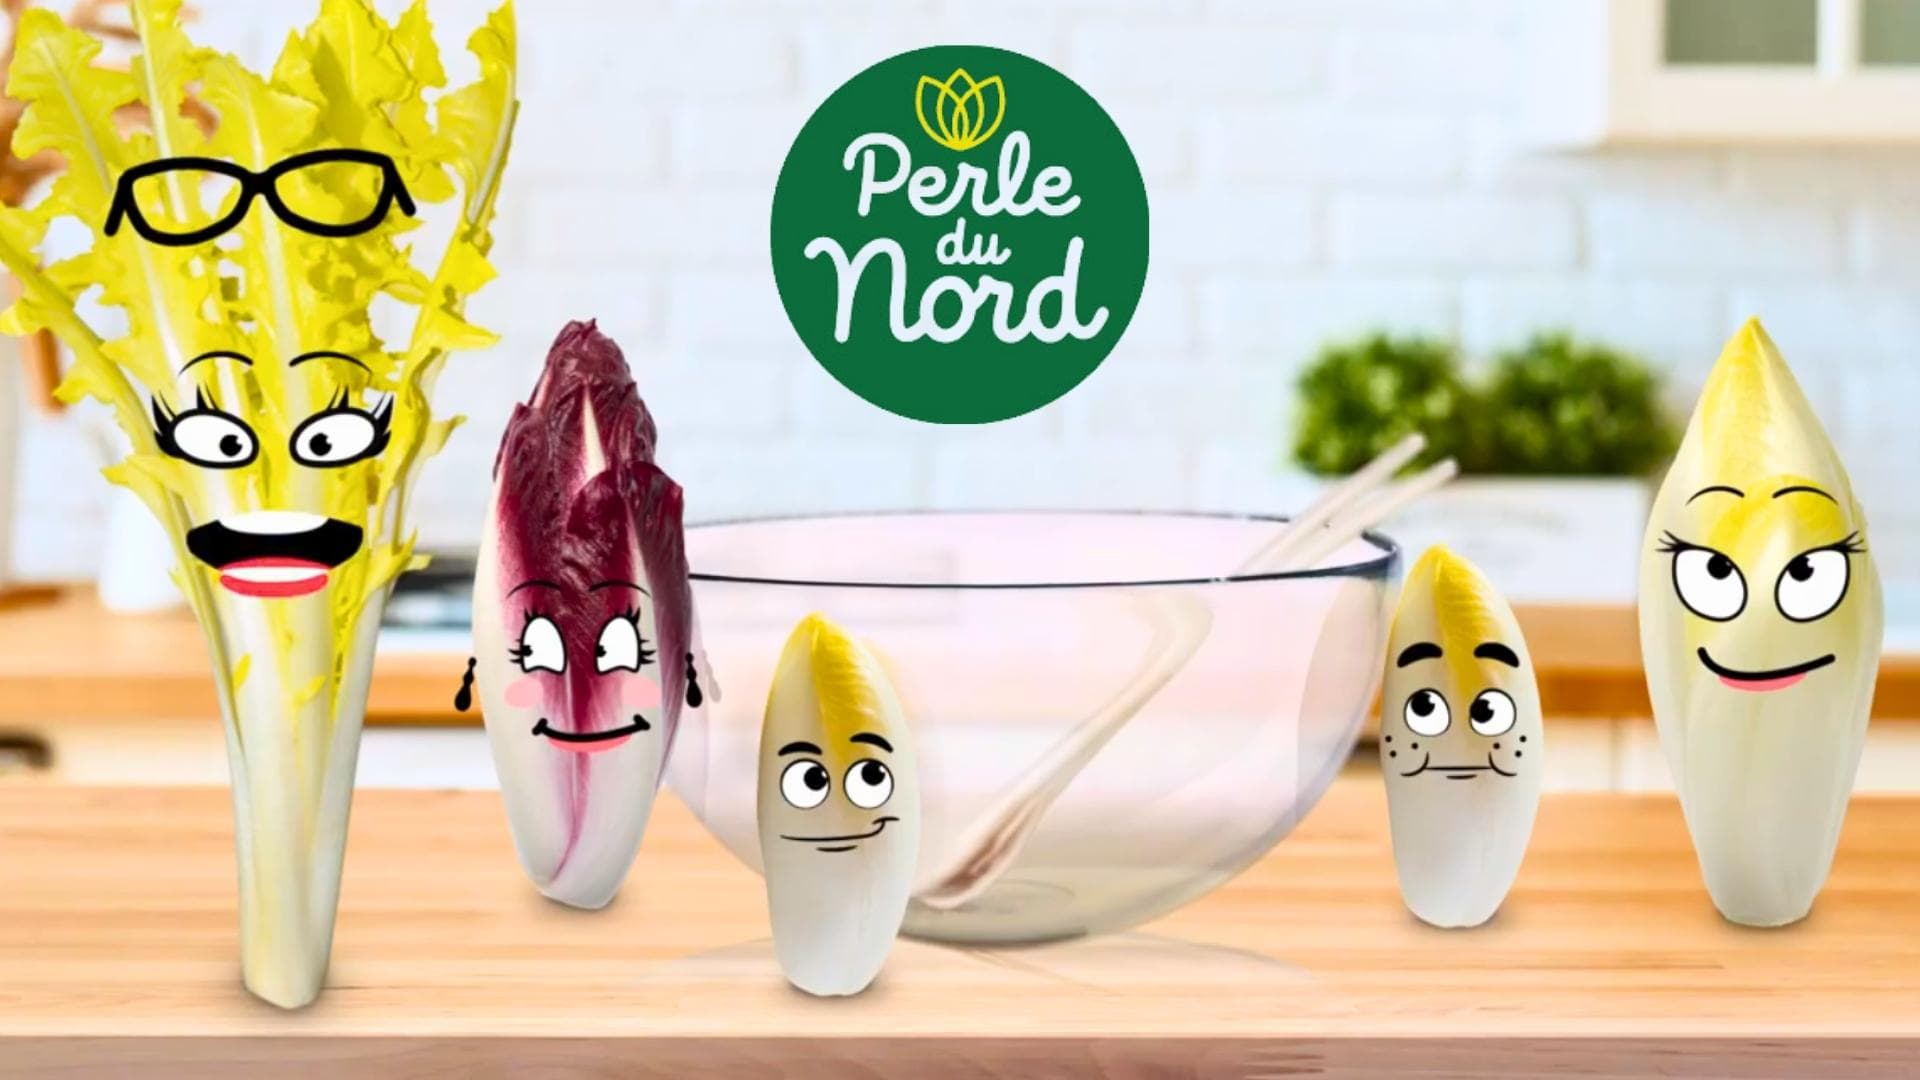 Cartoon voice-over for Perle du Nord